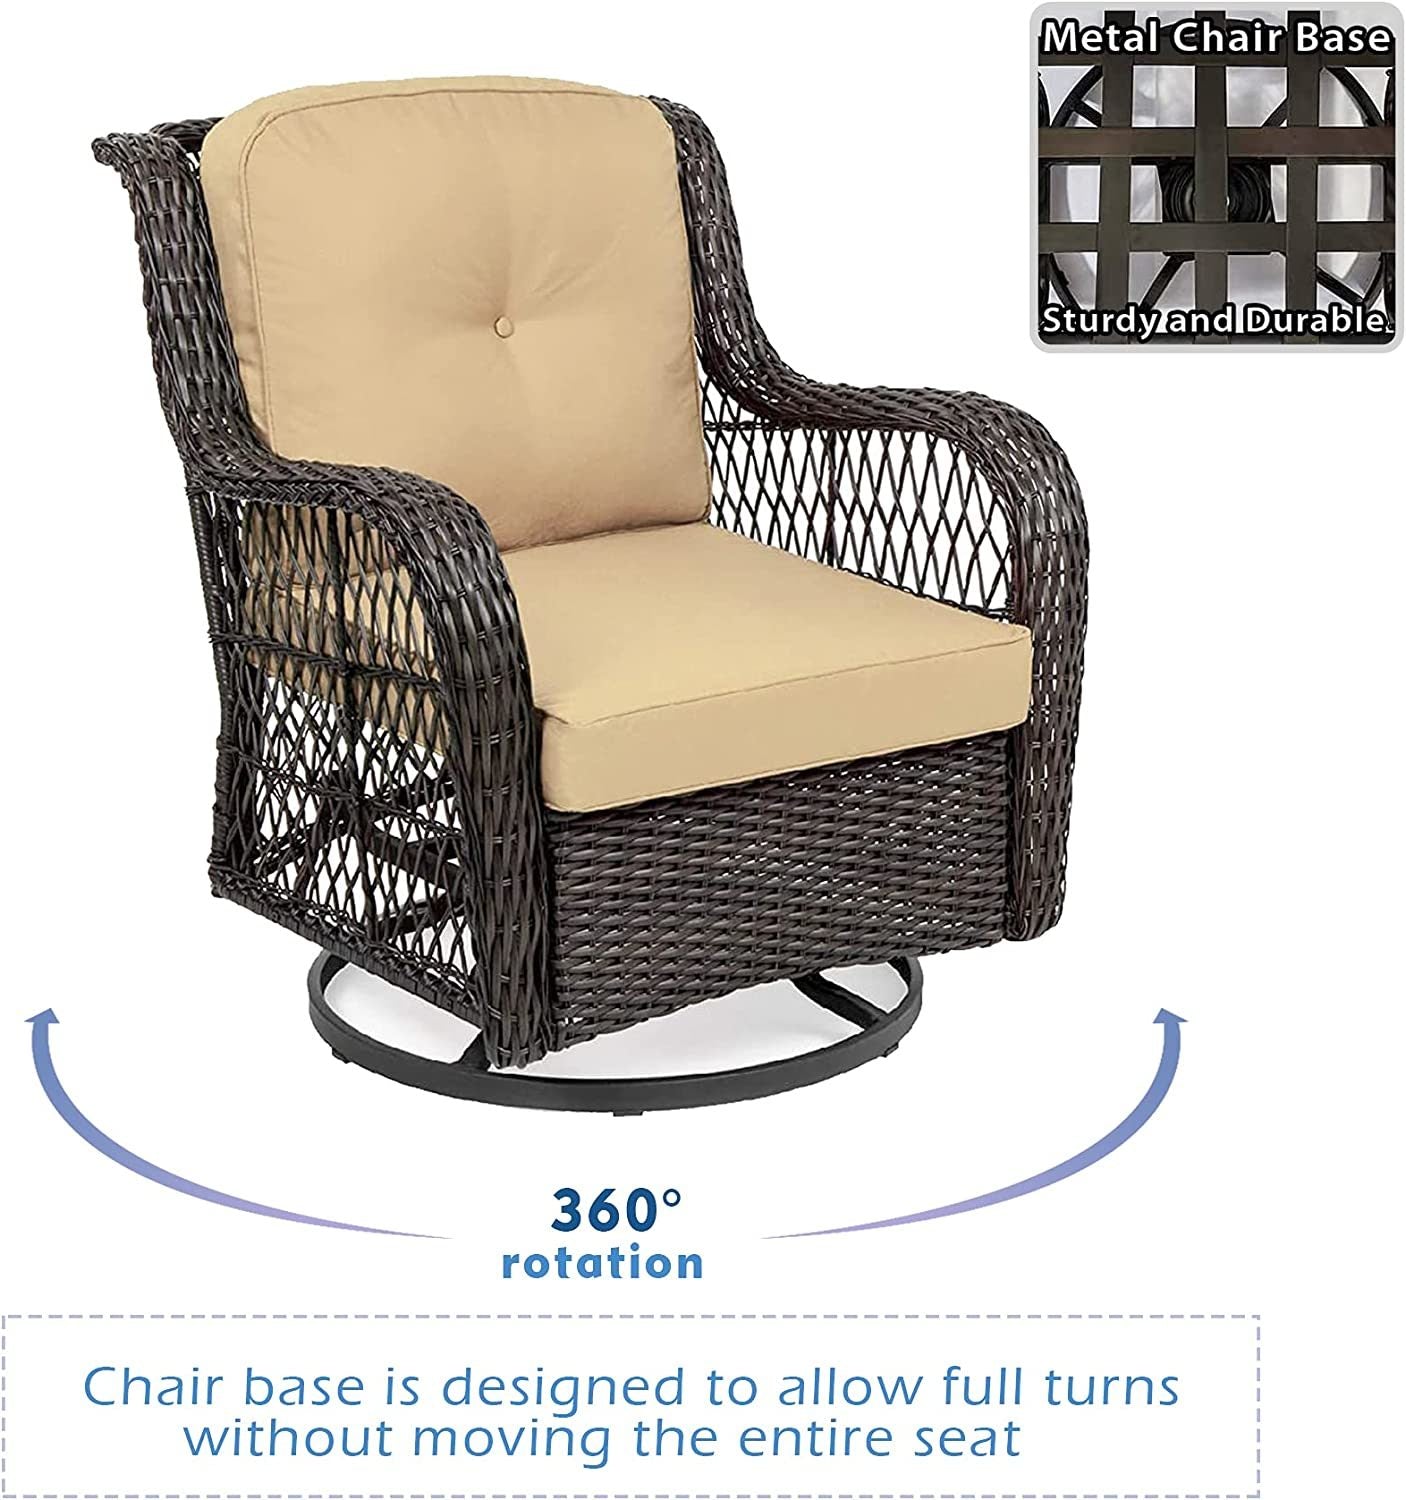 Resin Wicker Swivel Rocker Patio Chair; and Tempered Glass Top Side Coffee Table; Outdoor Rattan Conversation Sets